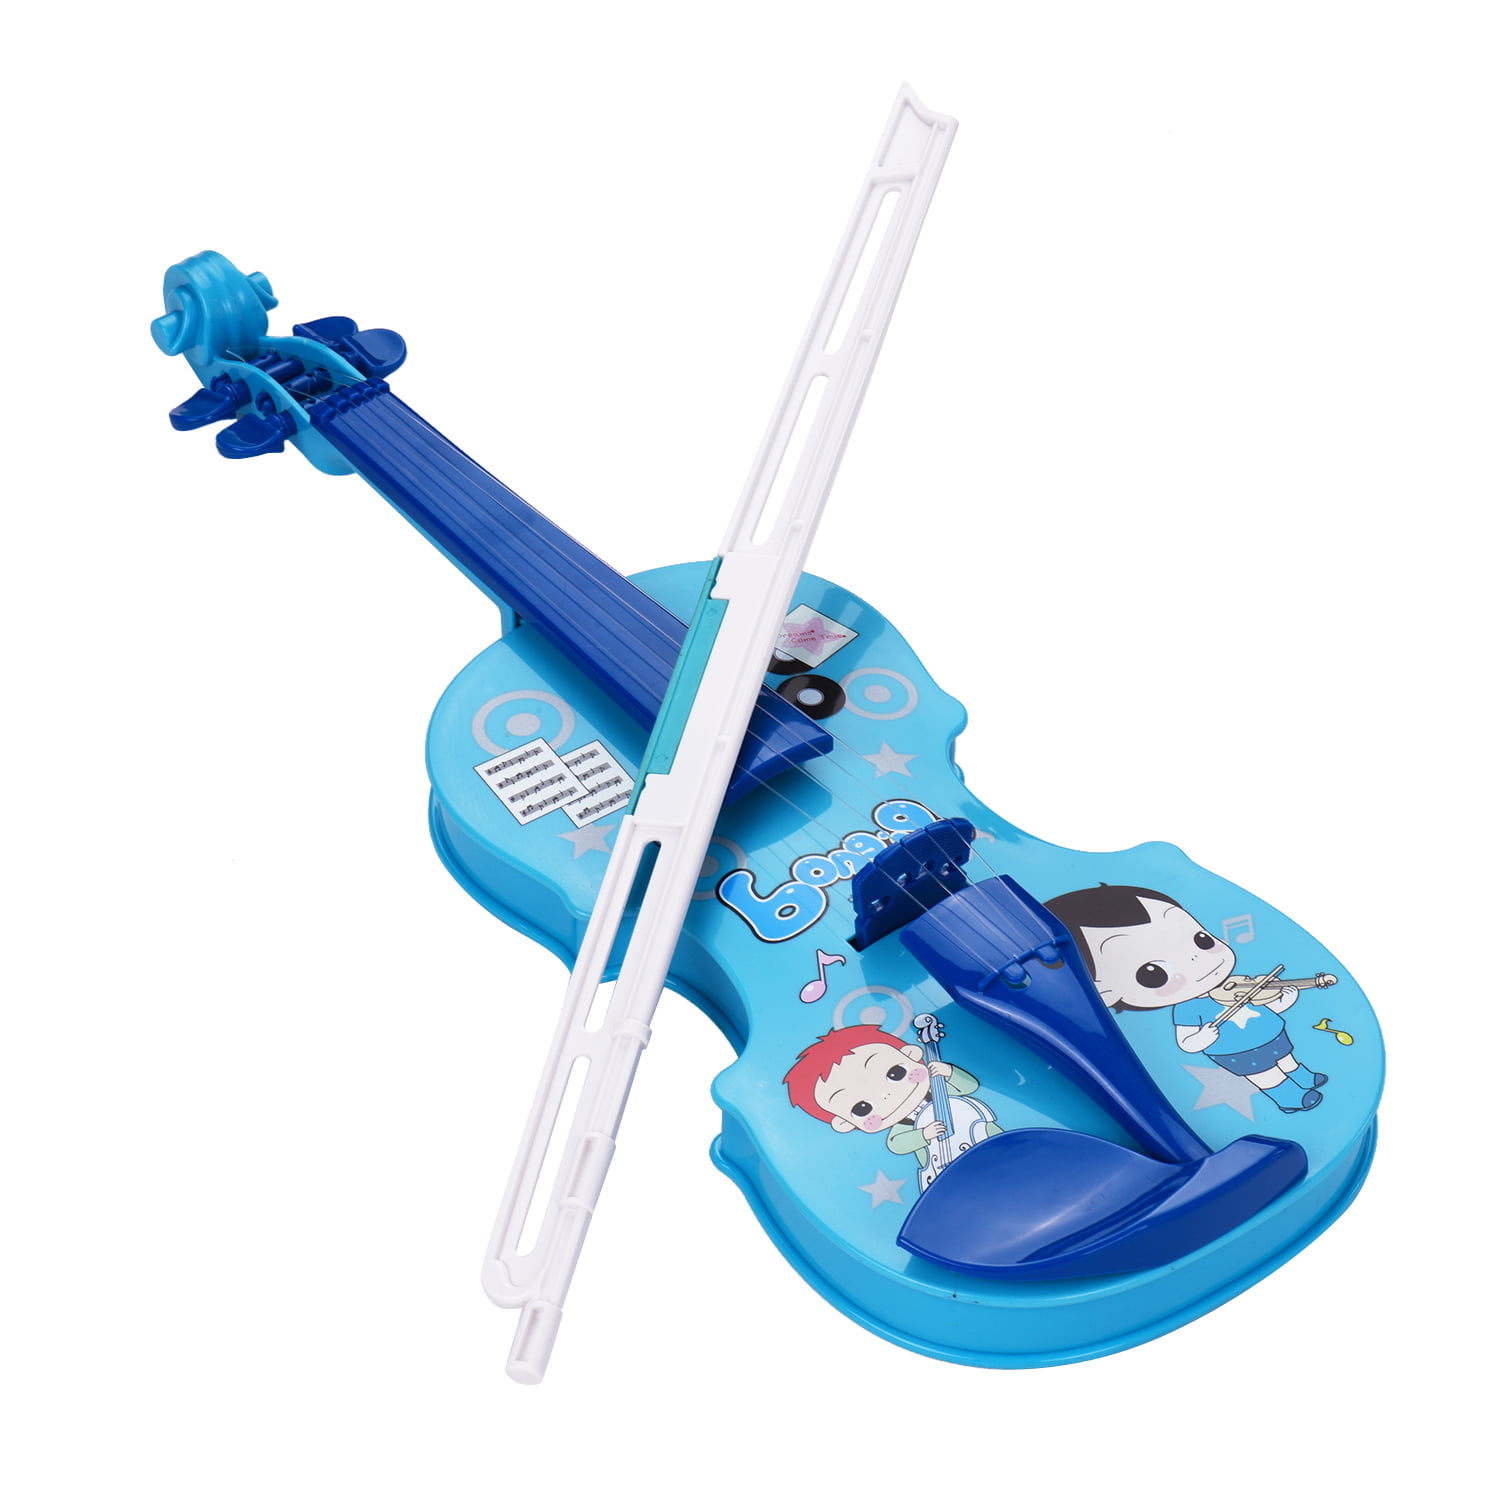 Toy Violin Electronic Toy Violin for Kids 